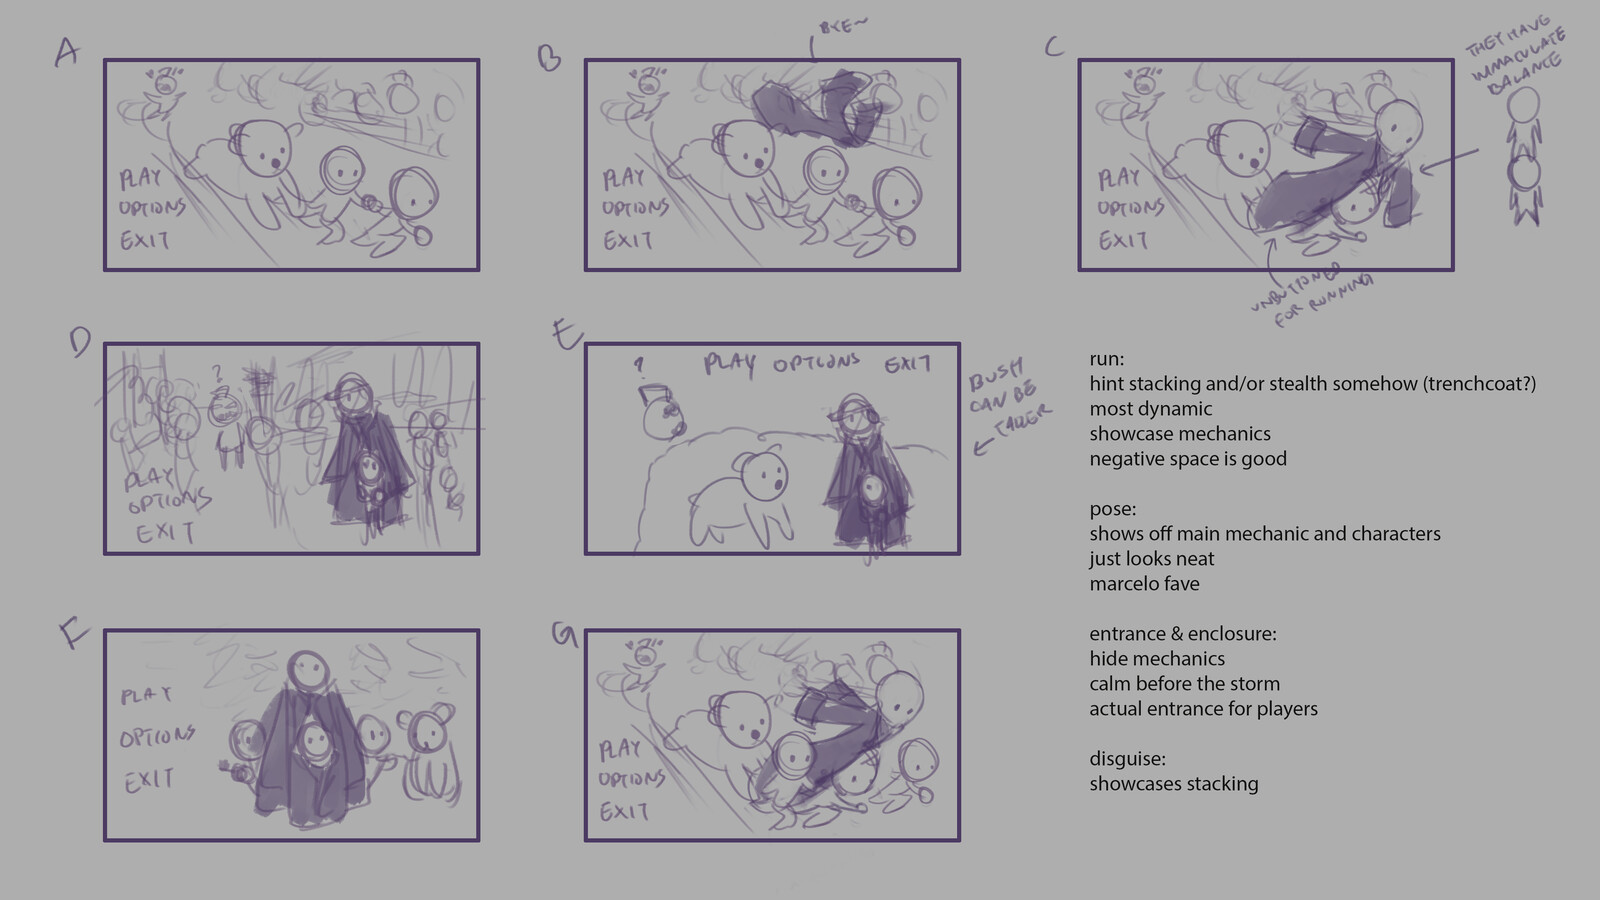 Refined thumbnail sketches after receiving feedback